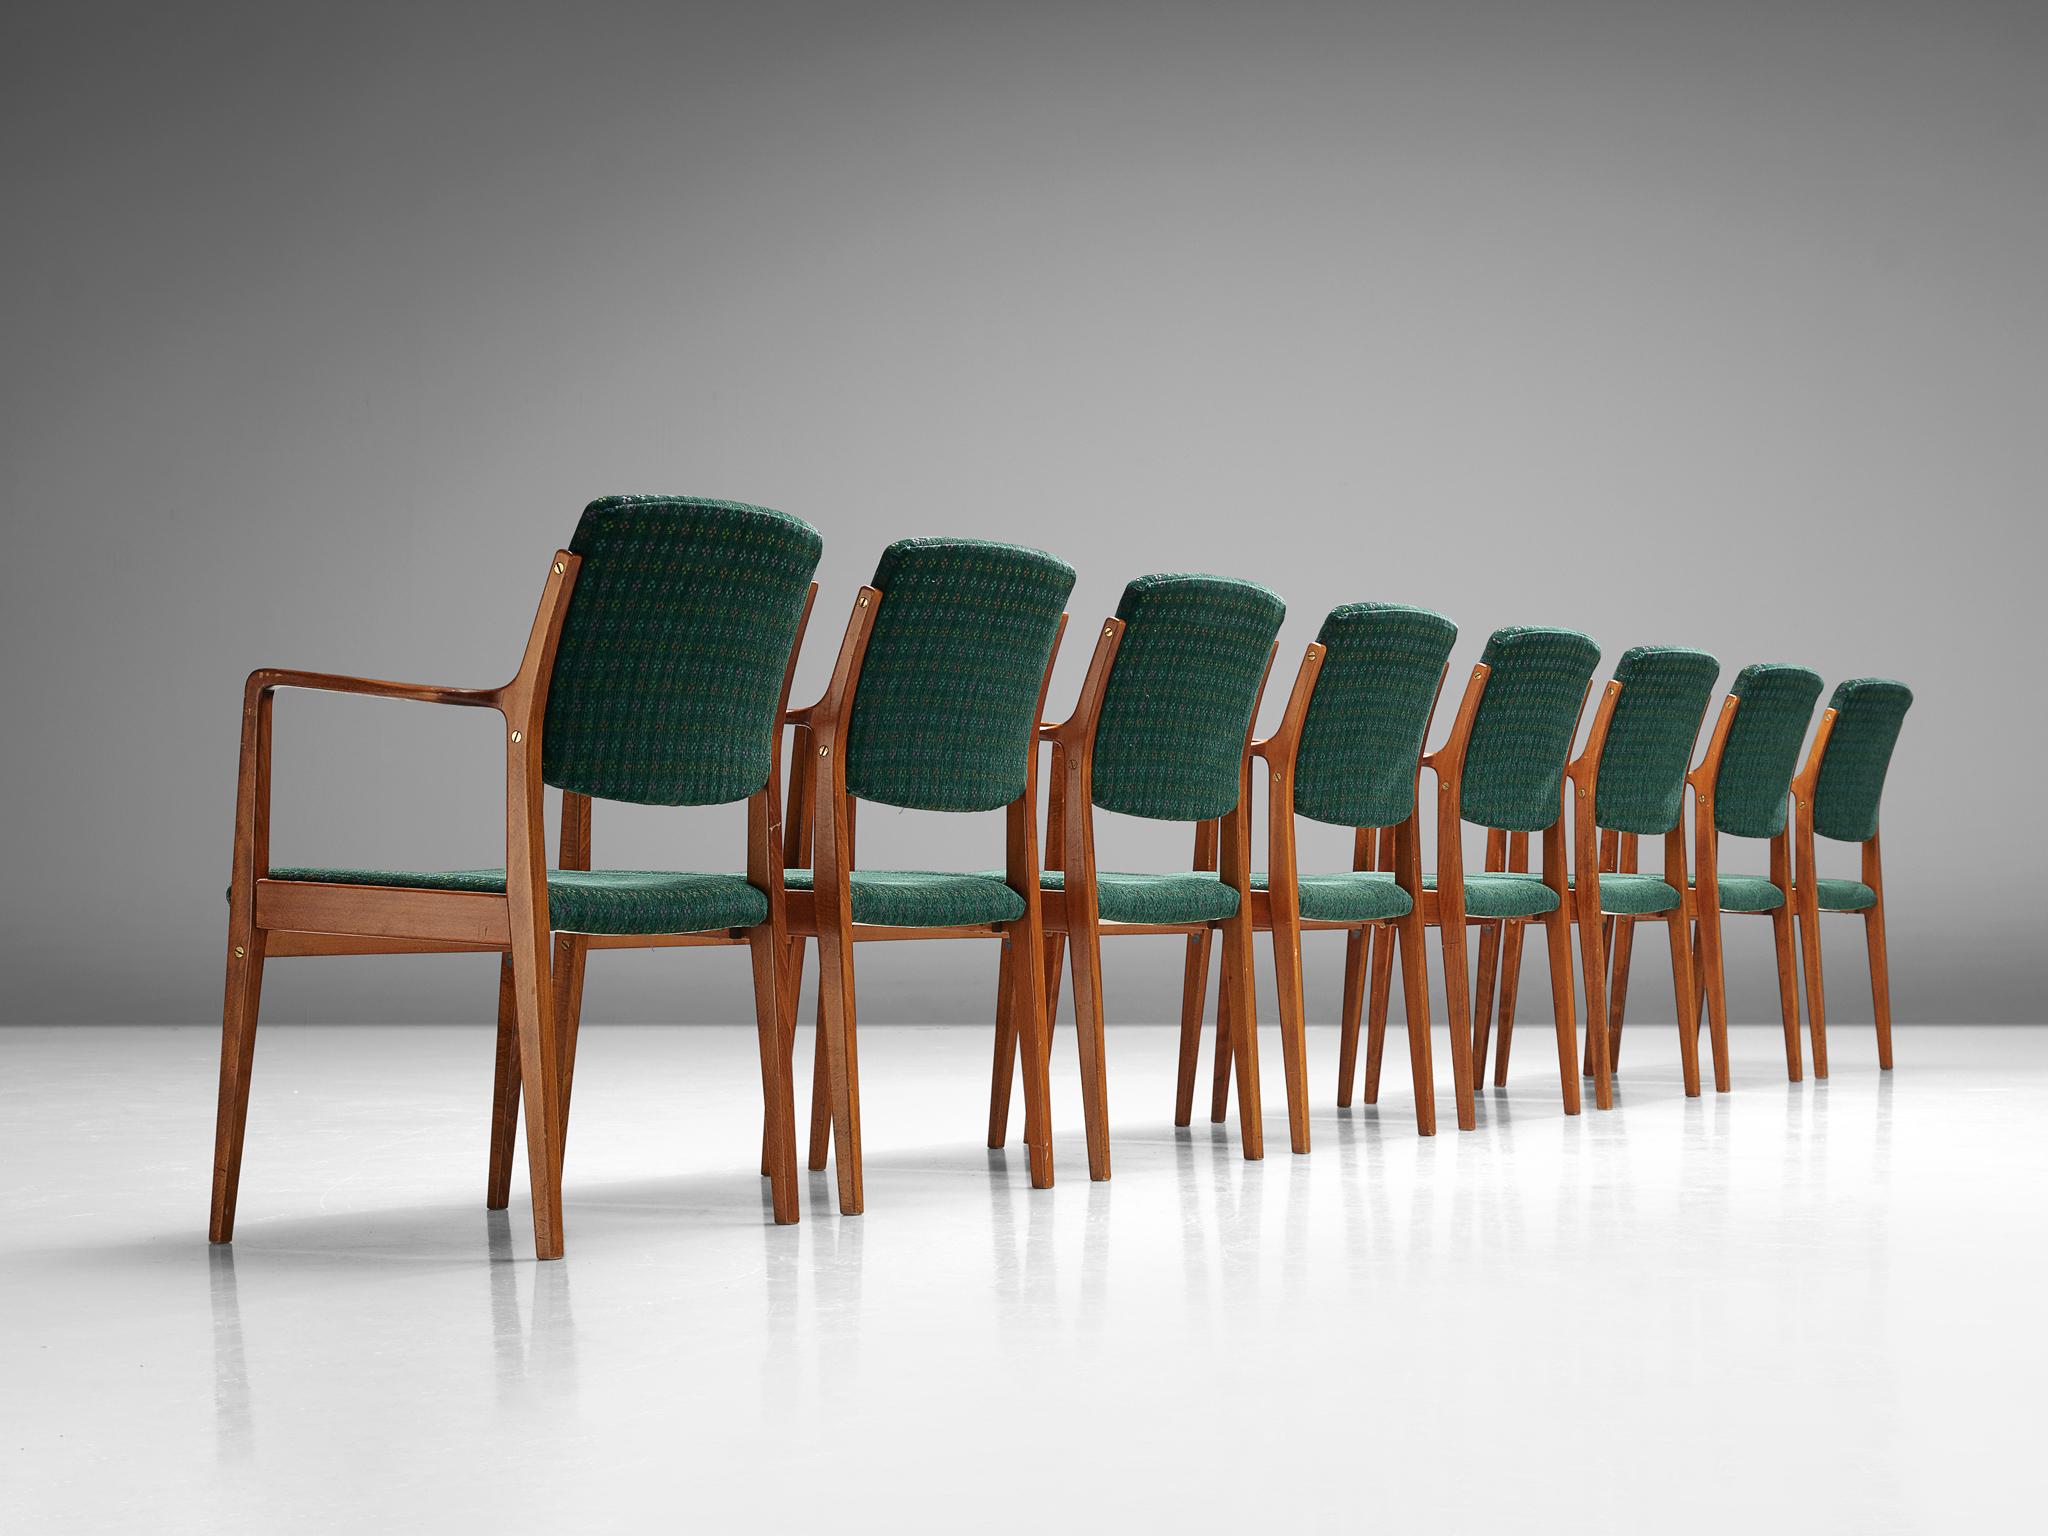 Åtvidabergs Snickerifabrik, set of eight dining chairs, stained beech, fabric, Sweden, 1960s 

This Swedish set of armchairs have an elegant profile defined by round contours and subtle, curved lines. The tilted backrest and wide seat provide a